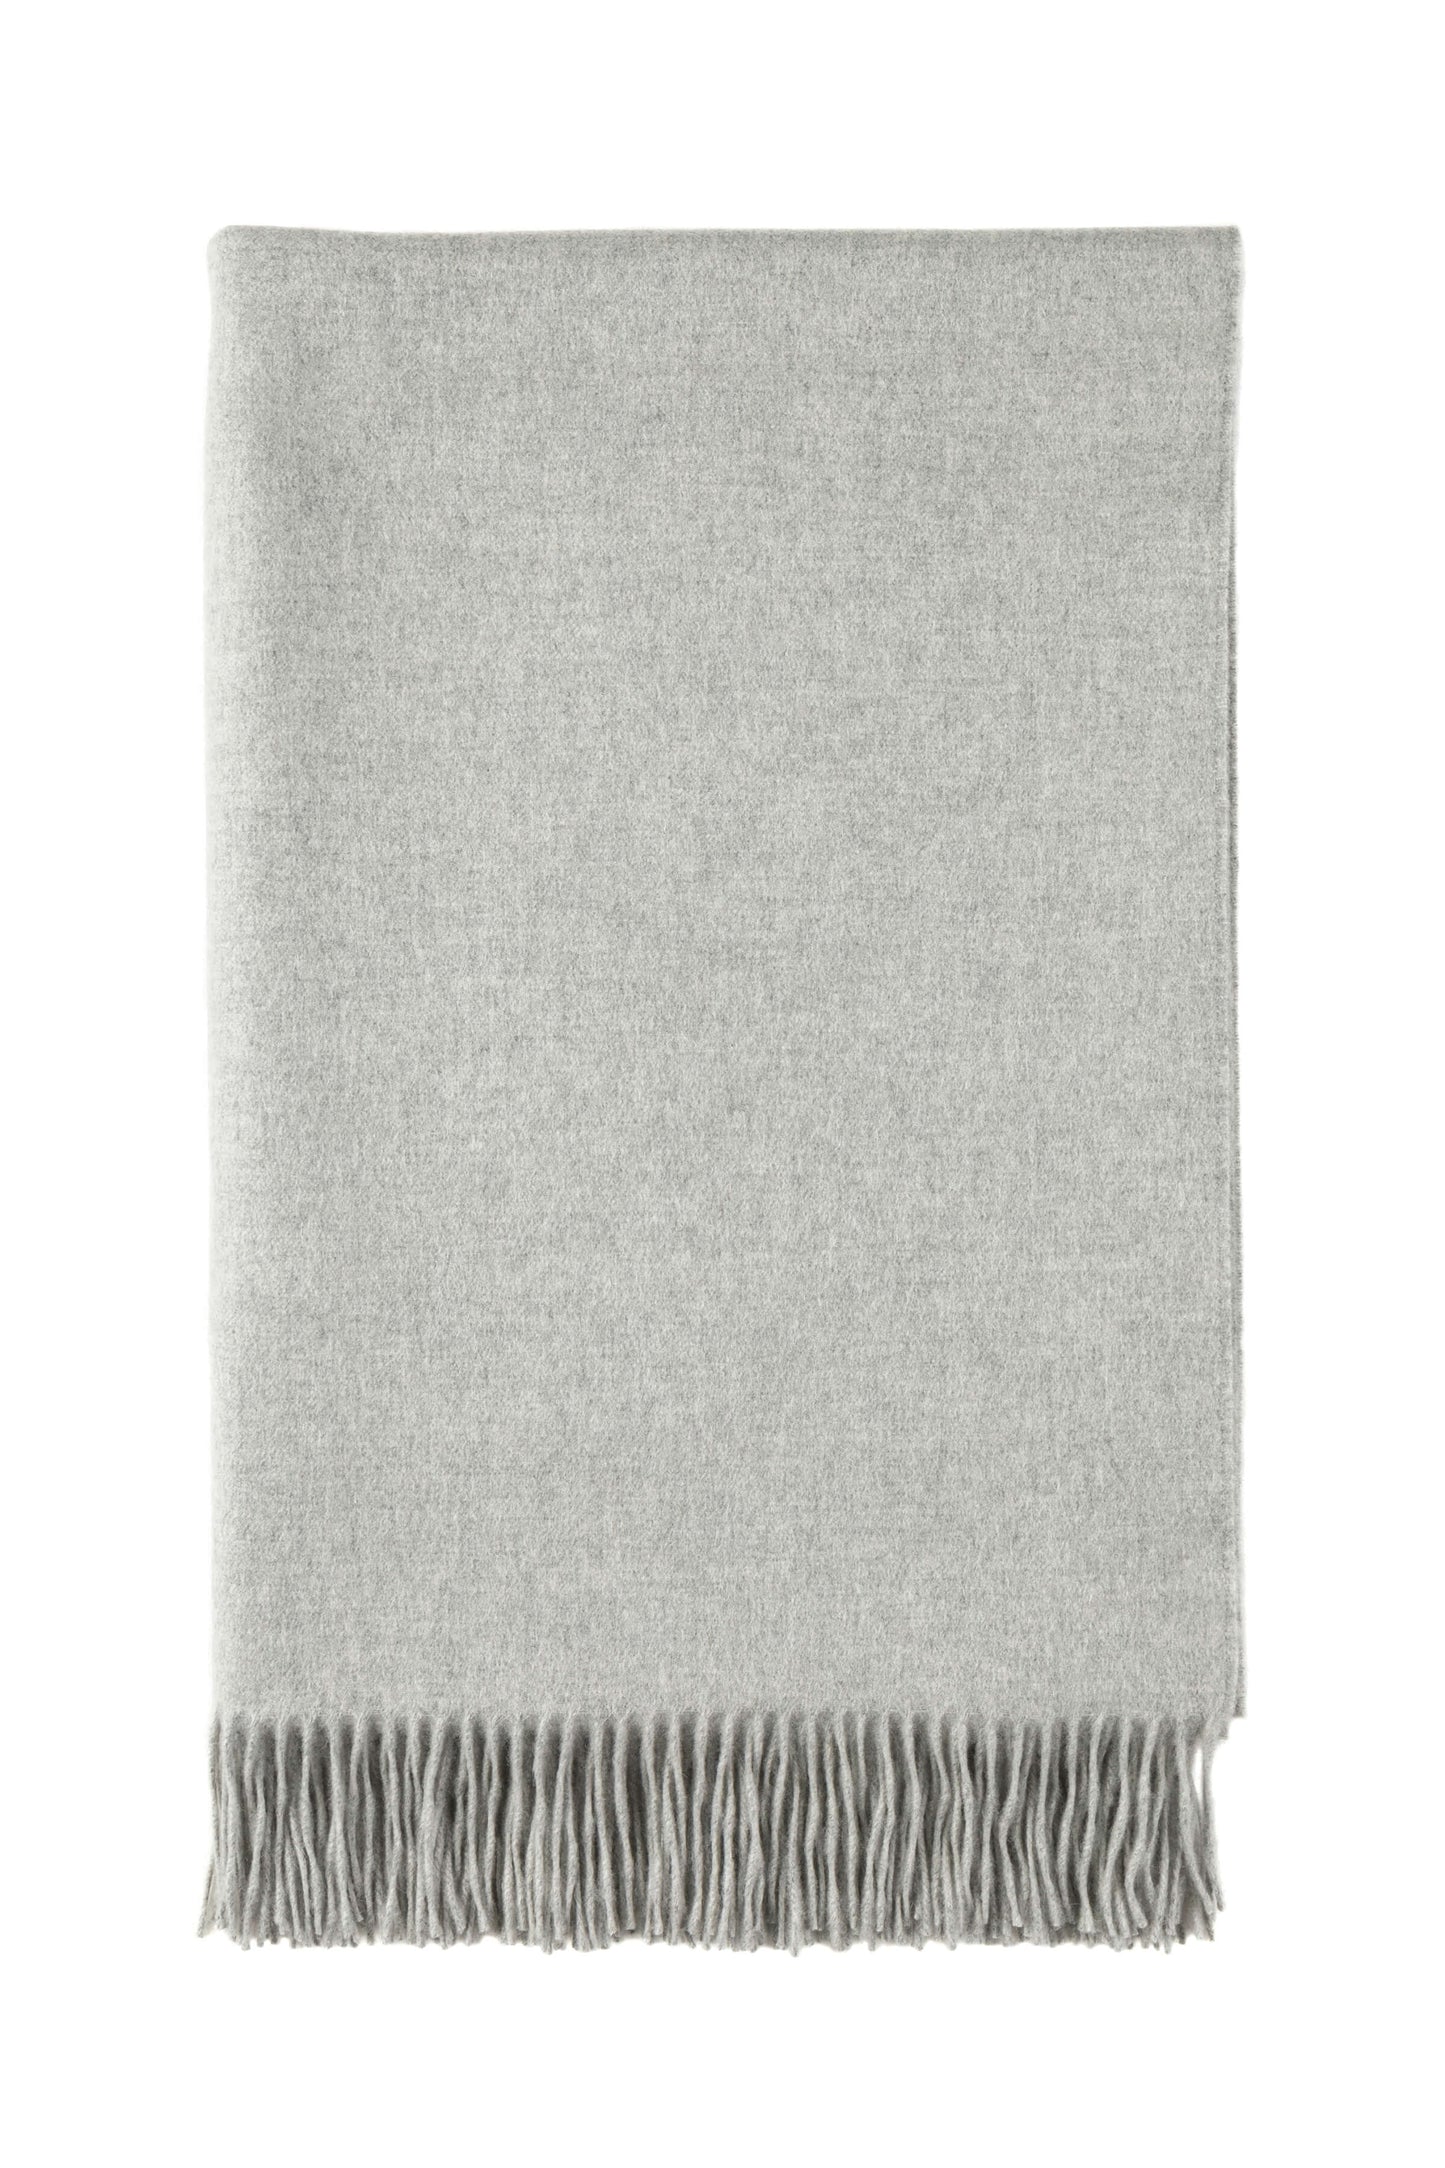 Johnstons of Elgin’s Cashmere Bed Throw in Silver on white background WA001159HA0100ONE